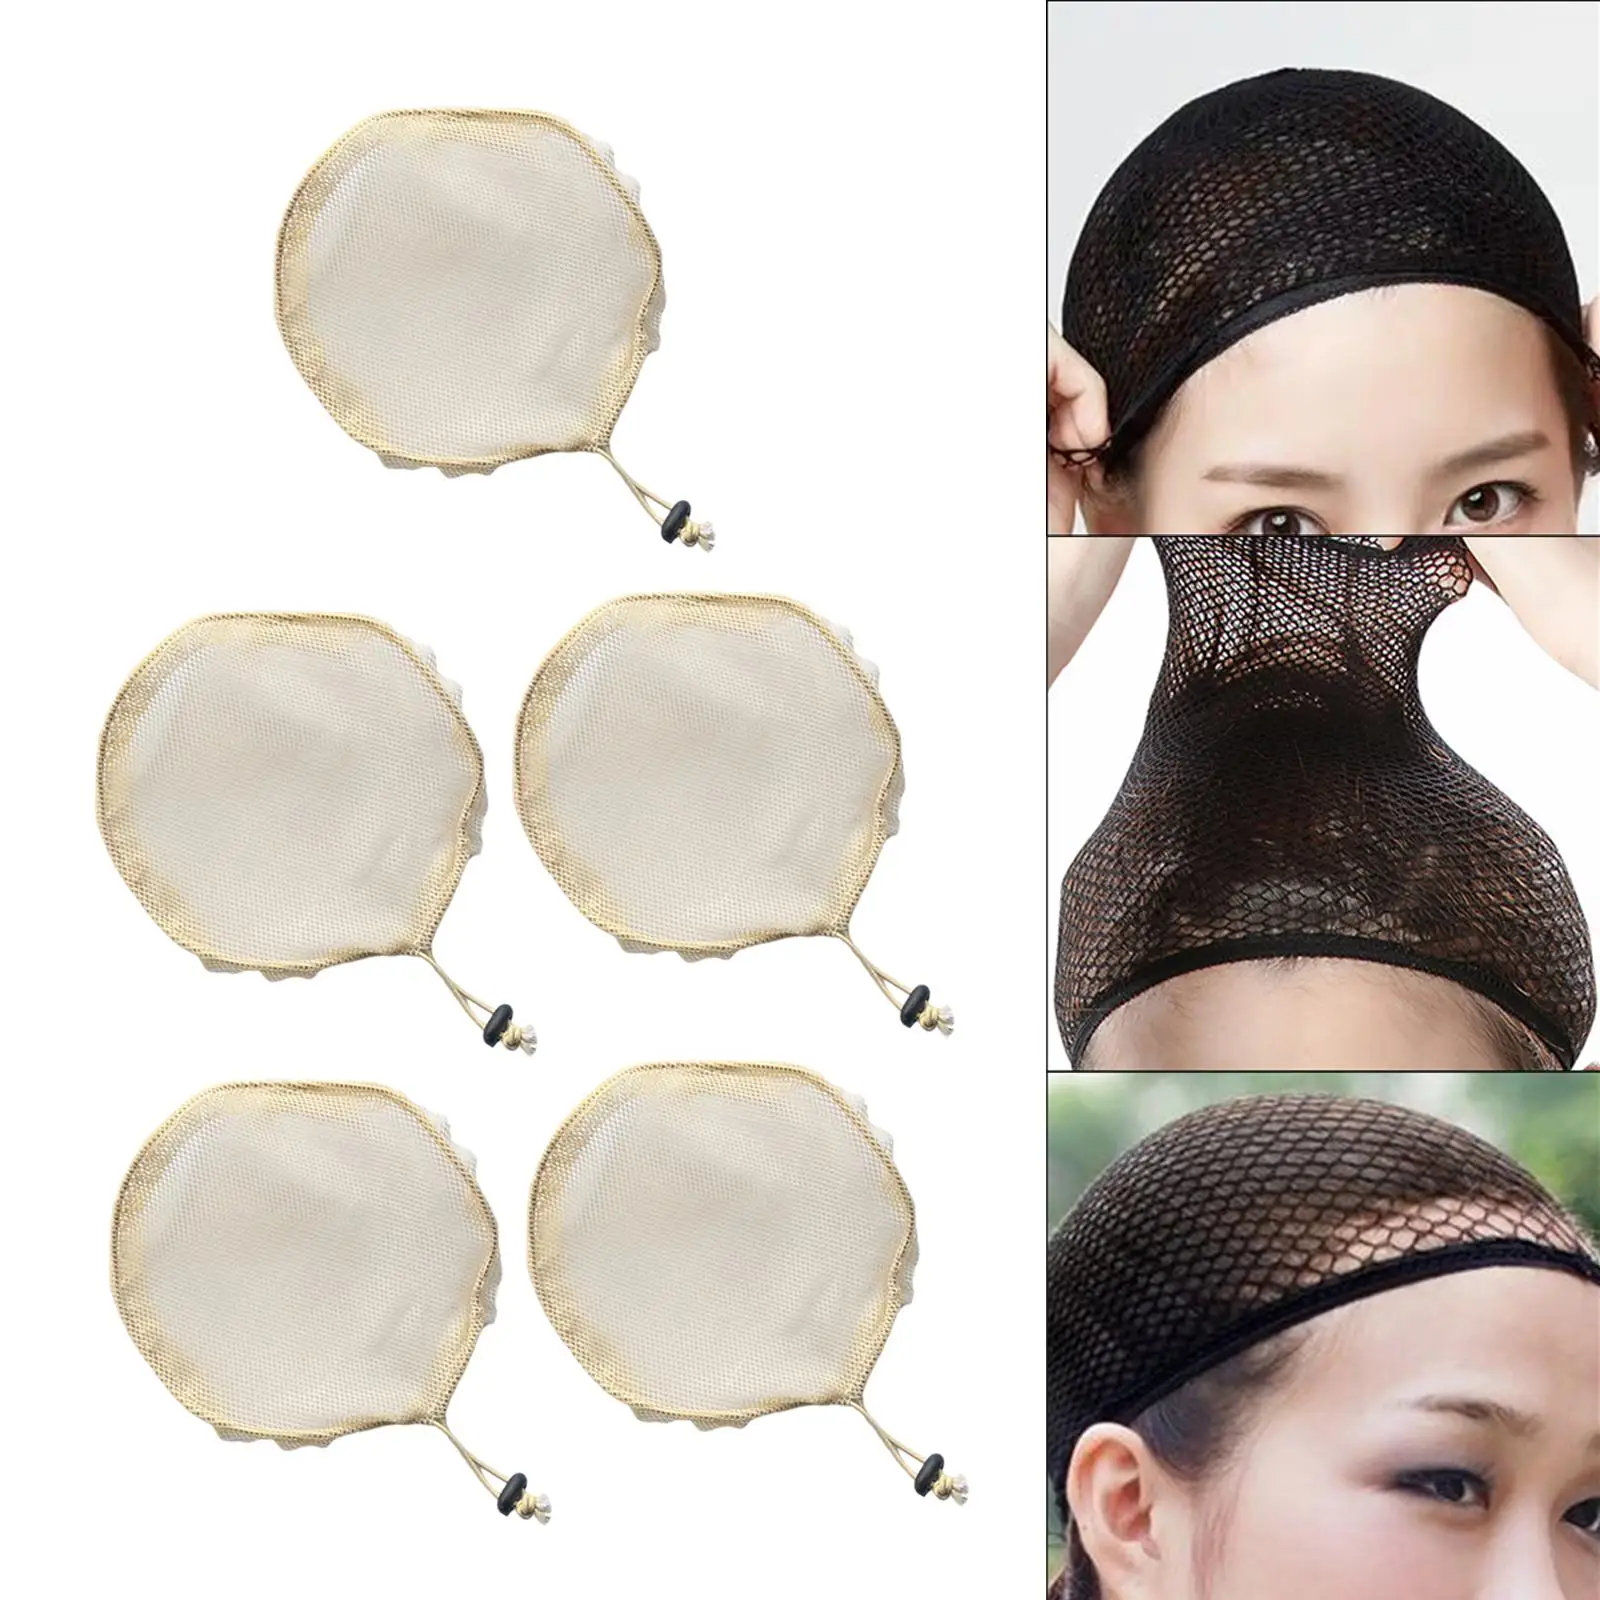 5 Pieces Wig Caps Liner Weaving Stretchy Stocking Hair Net for Halloween Cosplay Kids